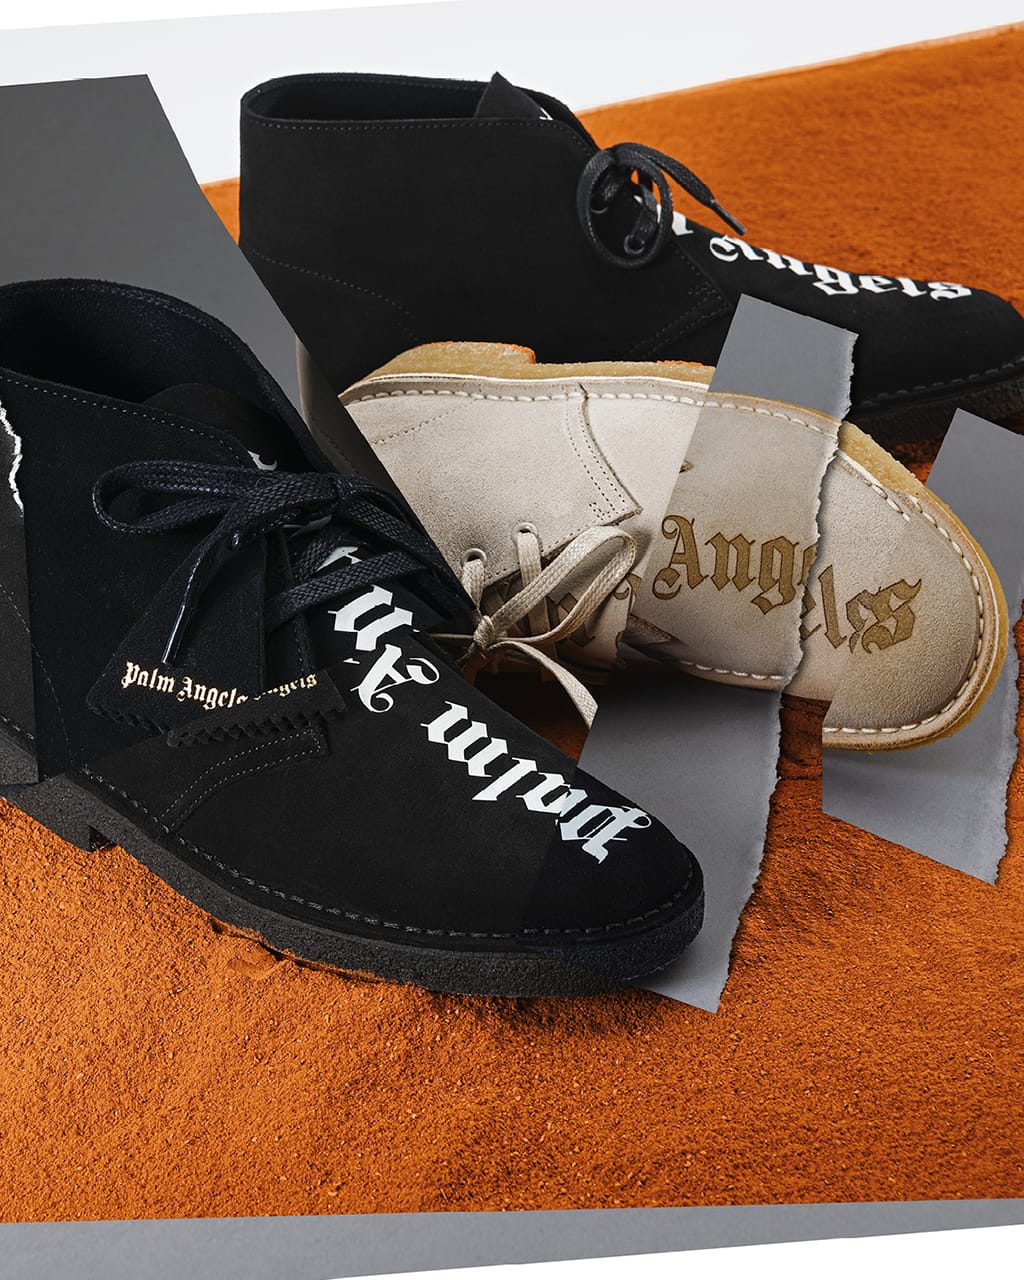 Palm Angels x Clarks Wallabee FW20 Shoe Collabs | Hypebeast